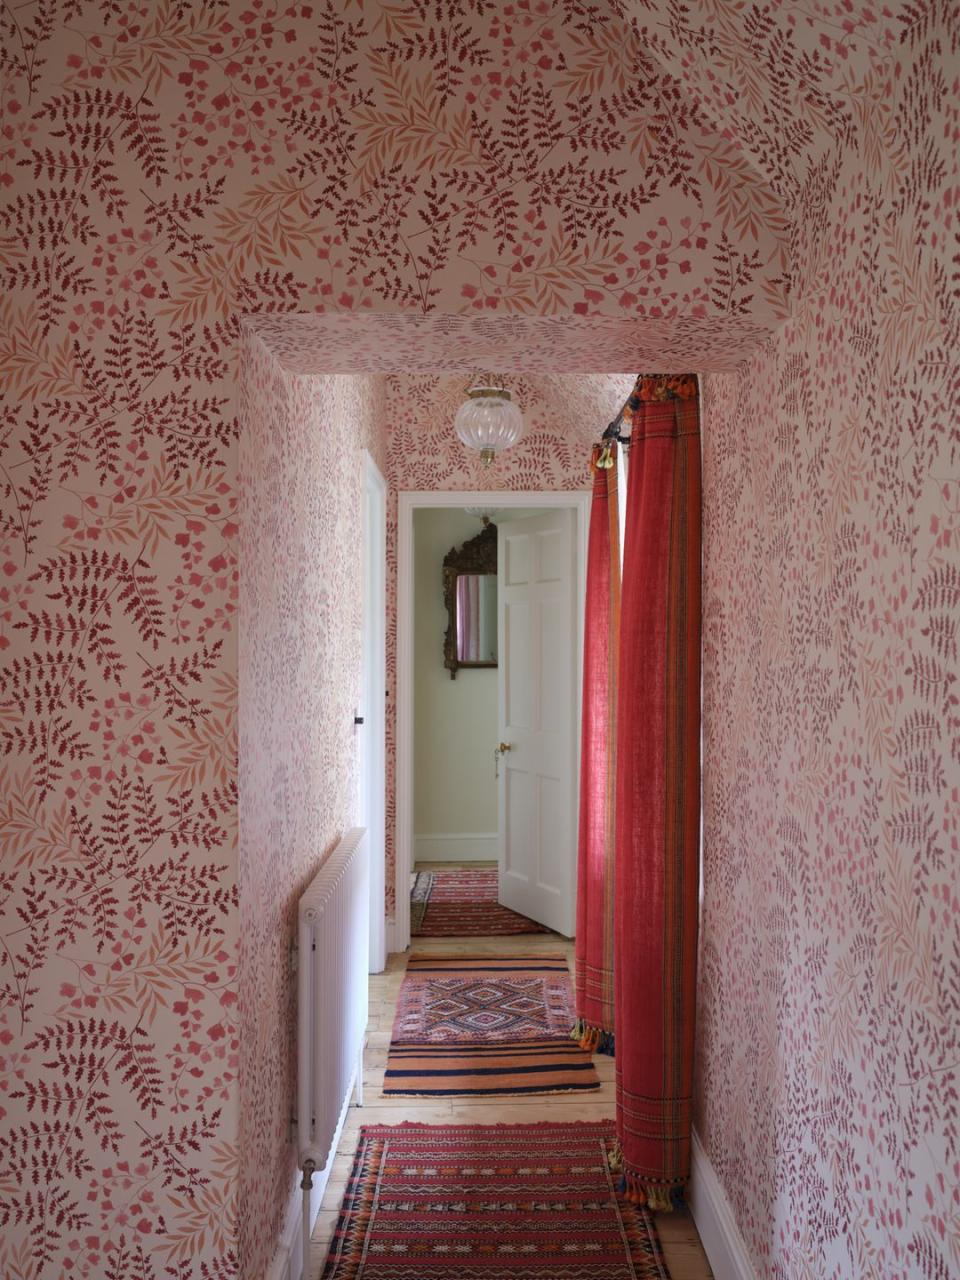 hallway with red botanical wallpaper and red curtains